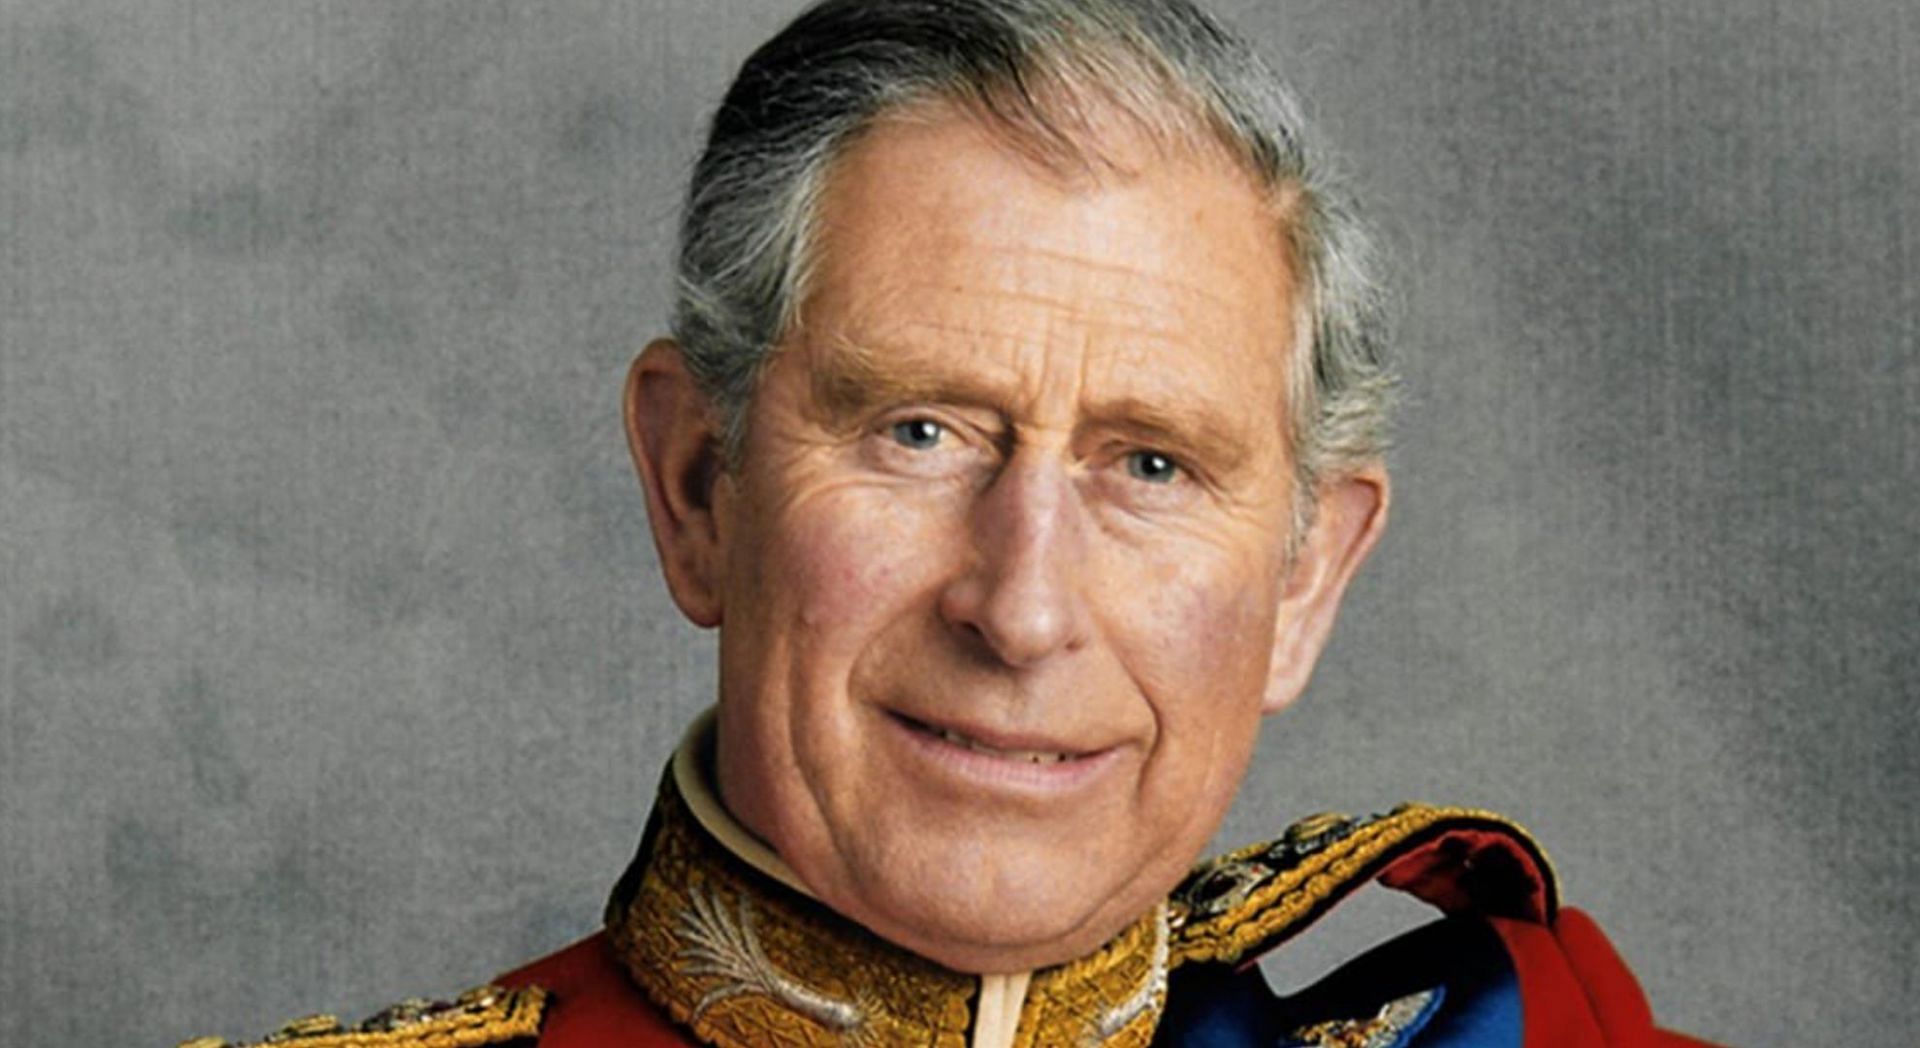 King Charles III immediately assumed the throne after Queen Elizabeth&#039;s passing (Image via Colin Brazier/Twitter)